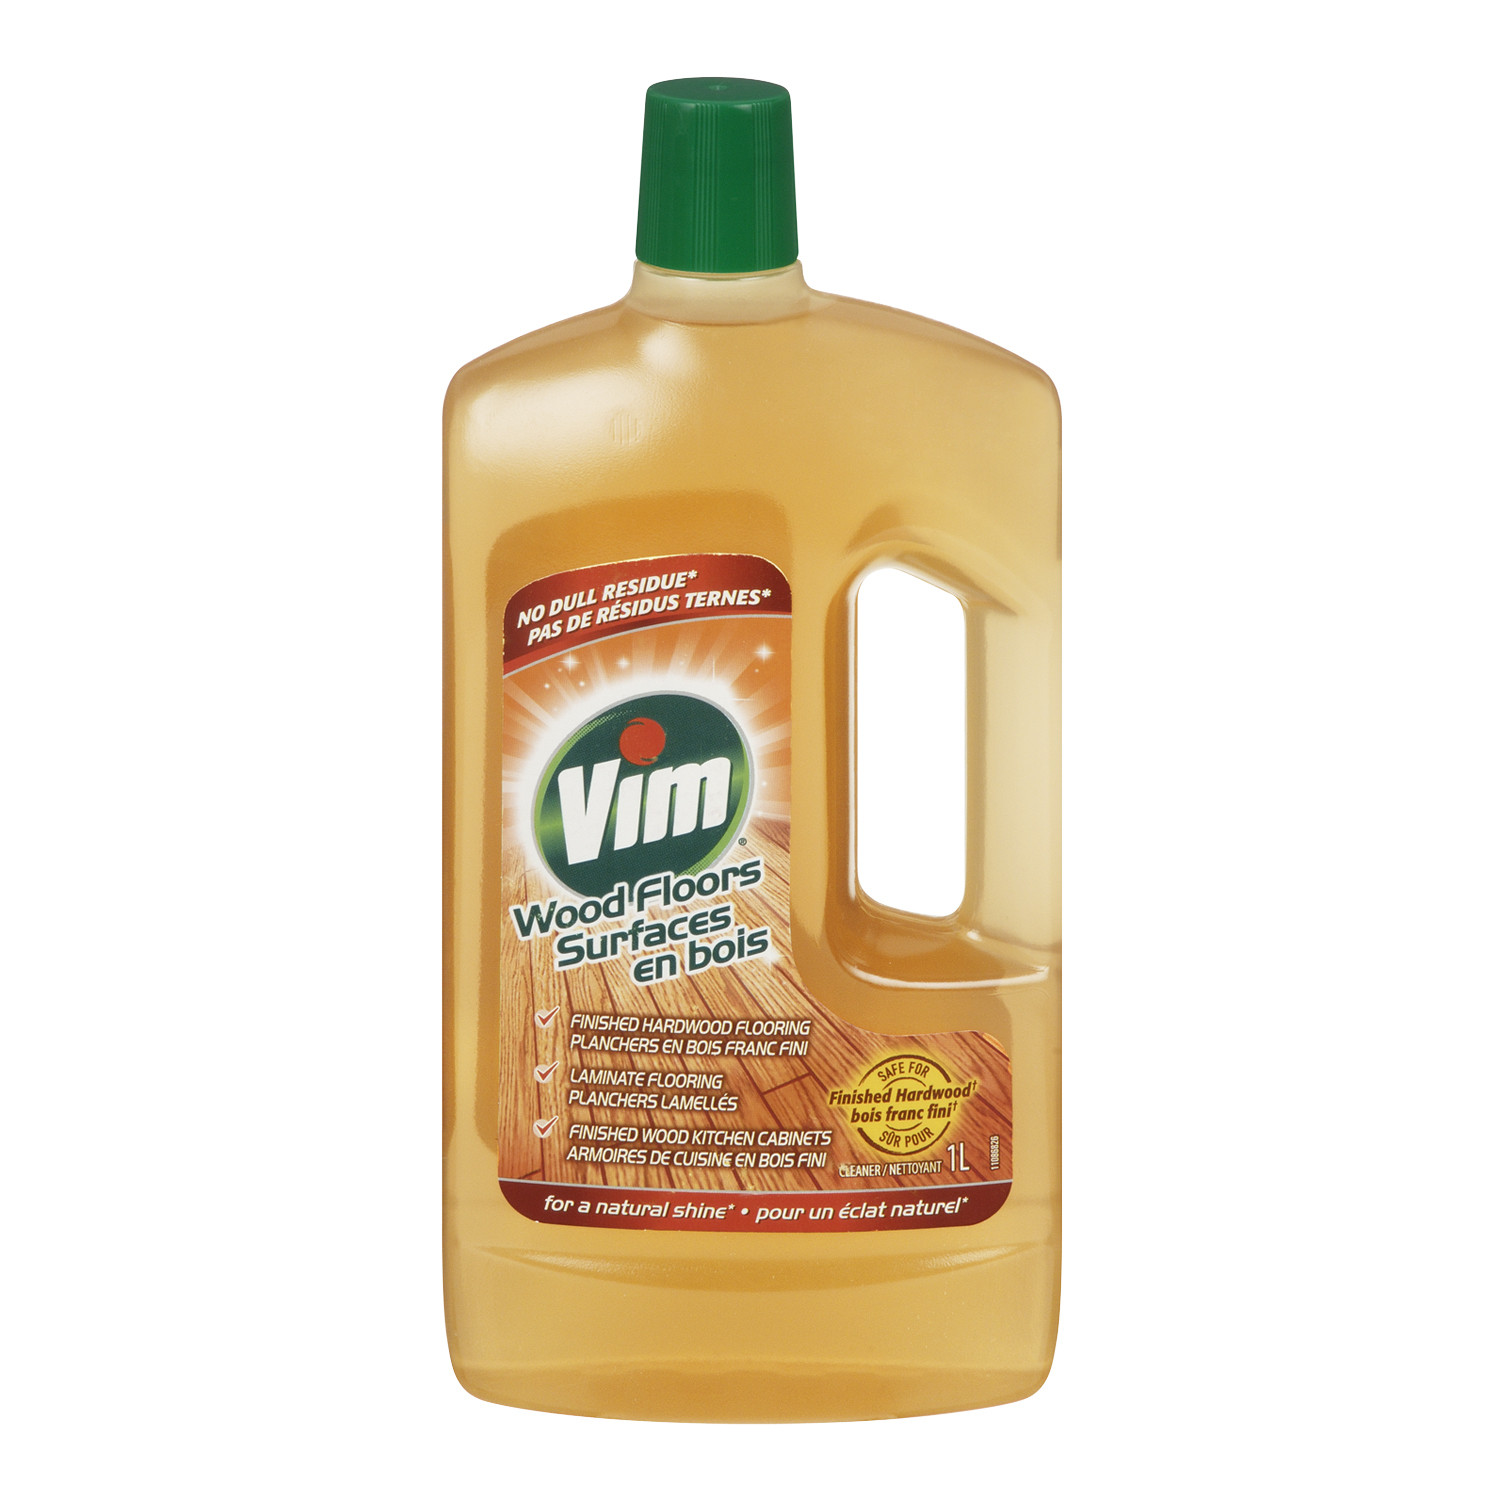 Where Can I Buy Bruce Hardwood Floor Cleaner Of Vim Hardwood Floor Surface Cleaner Reviews In Household Wood Pertaining to Vim Hardwood Floor Surface Cleaner Reviews In Household Hardwood Floor Cleaning Products Lowes